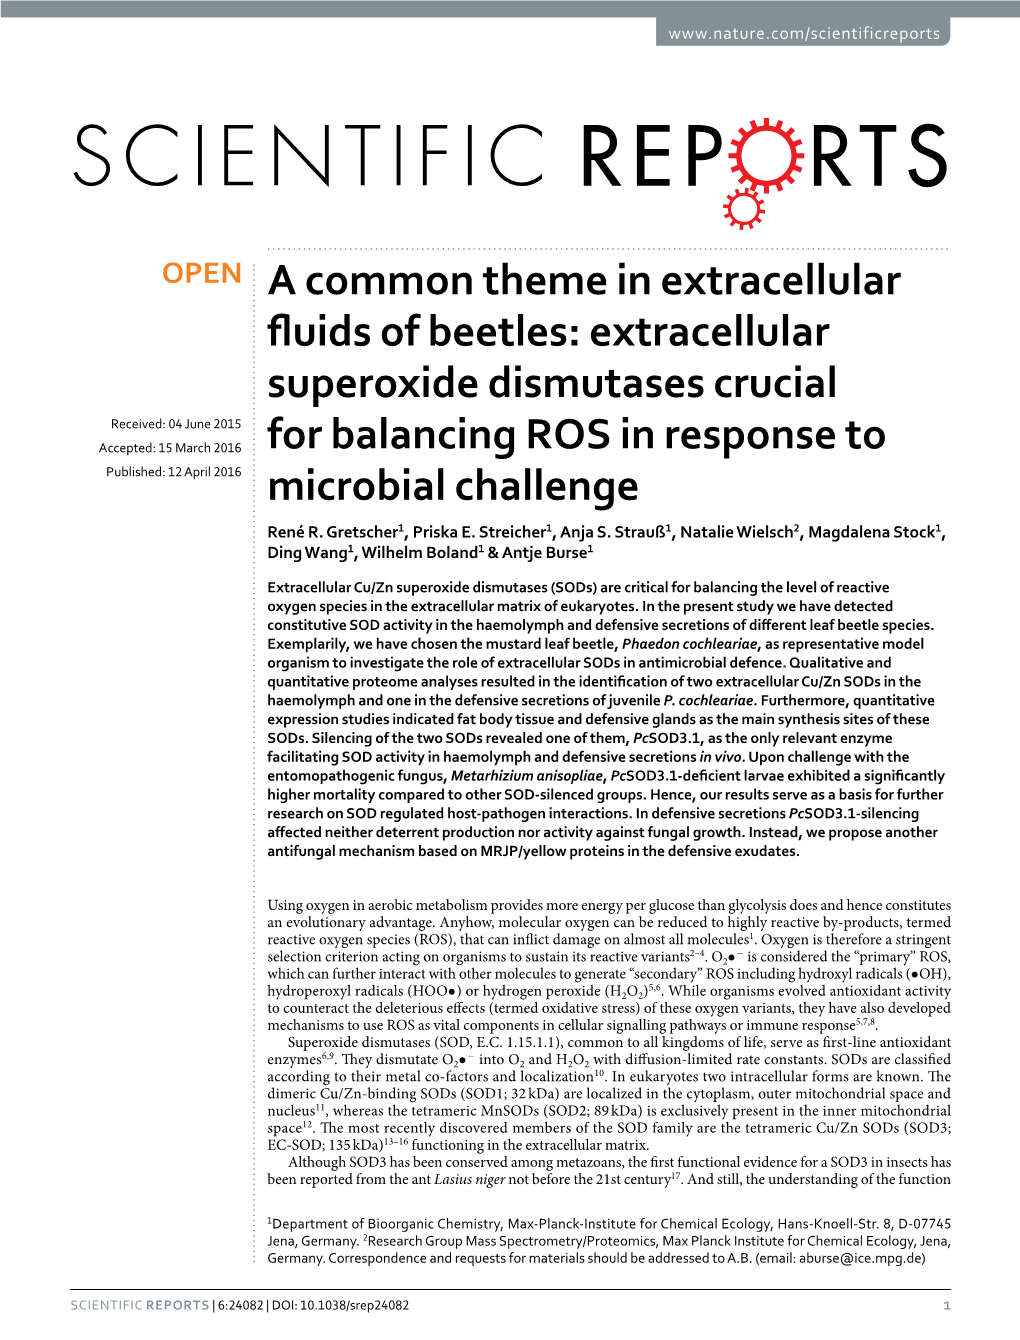 Extracellular Superoxide Dismutases Crucial for Balancing ROS in Response to Microbial Challenge